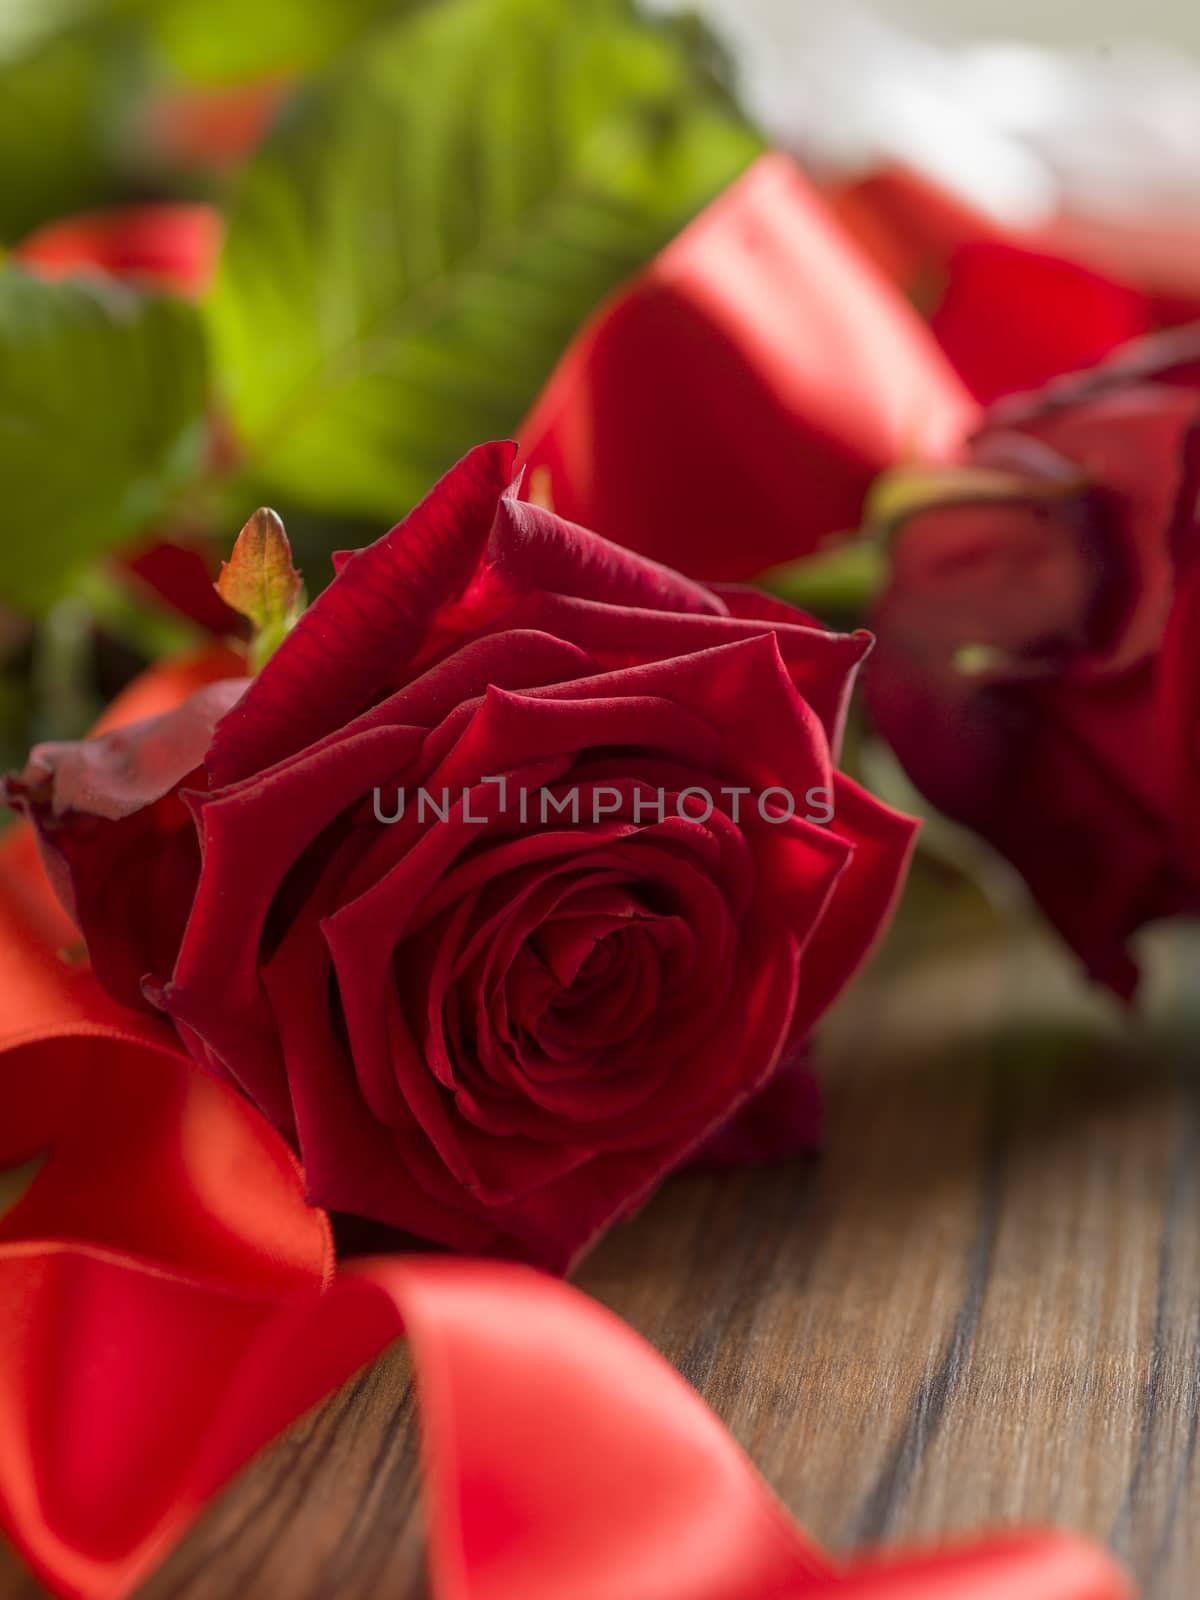 Valentine's day background with red roses and red ribbon on wood by Tjeerdkruse